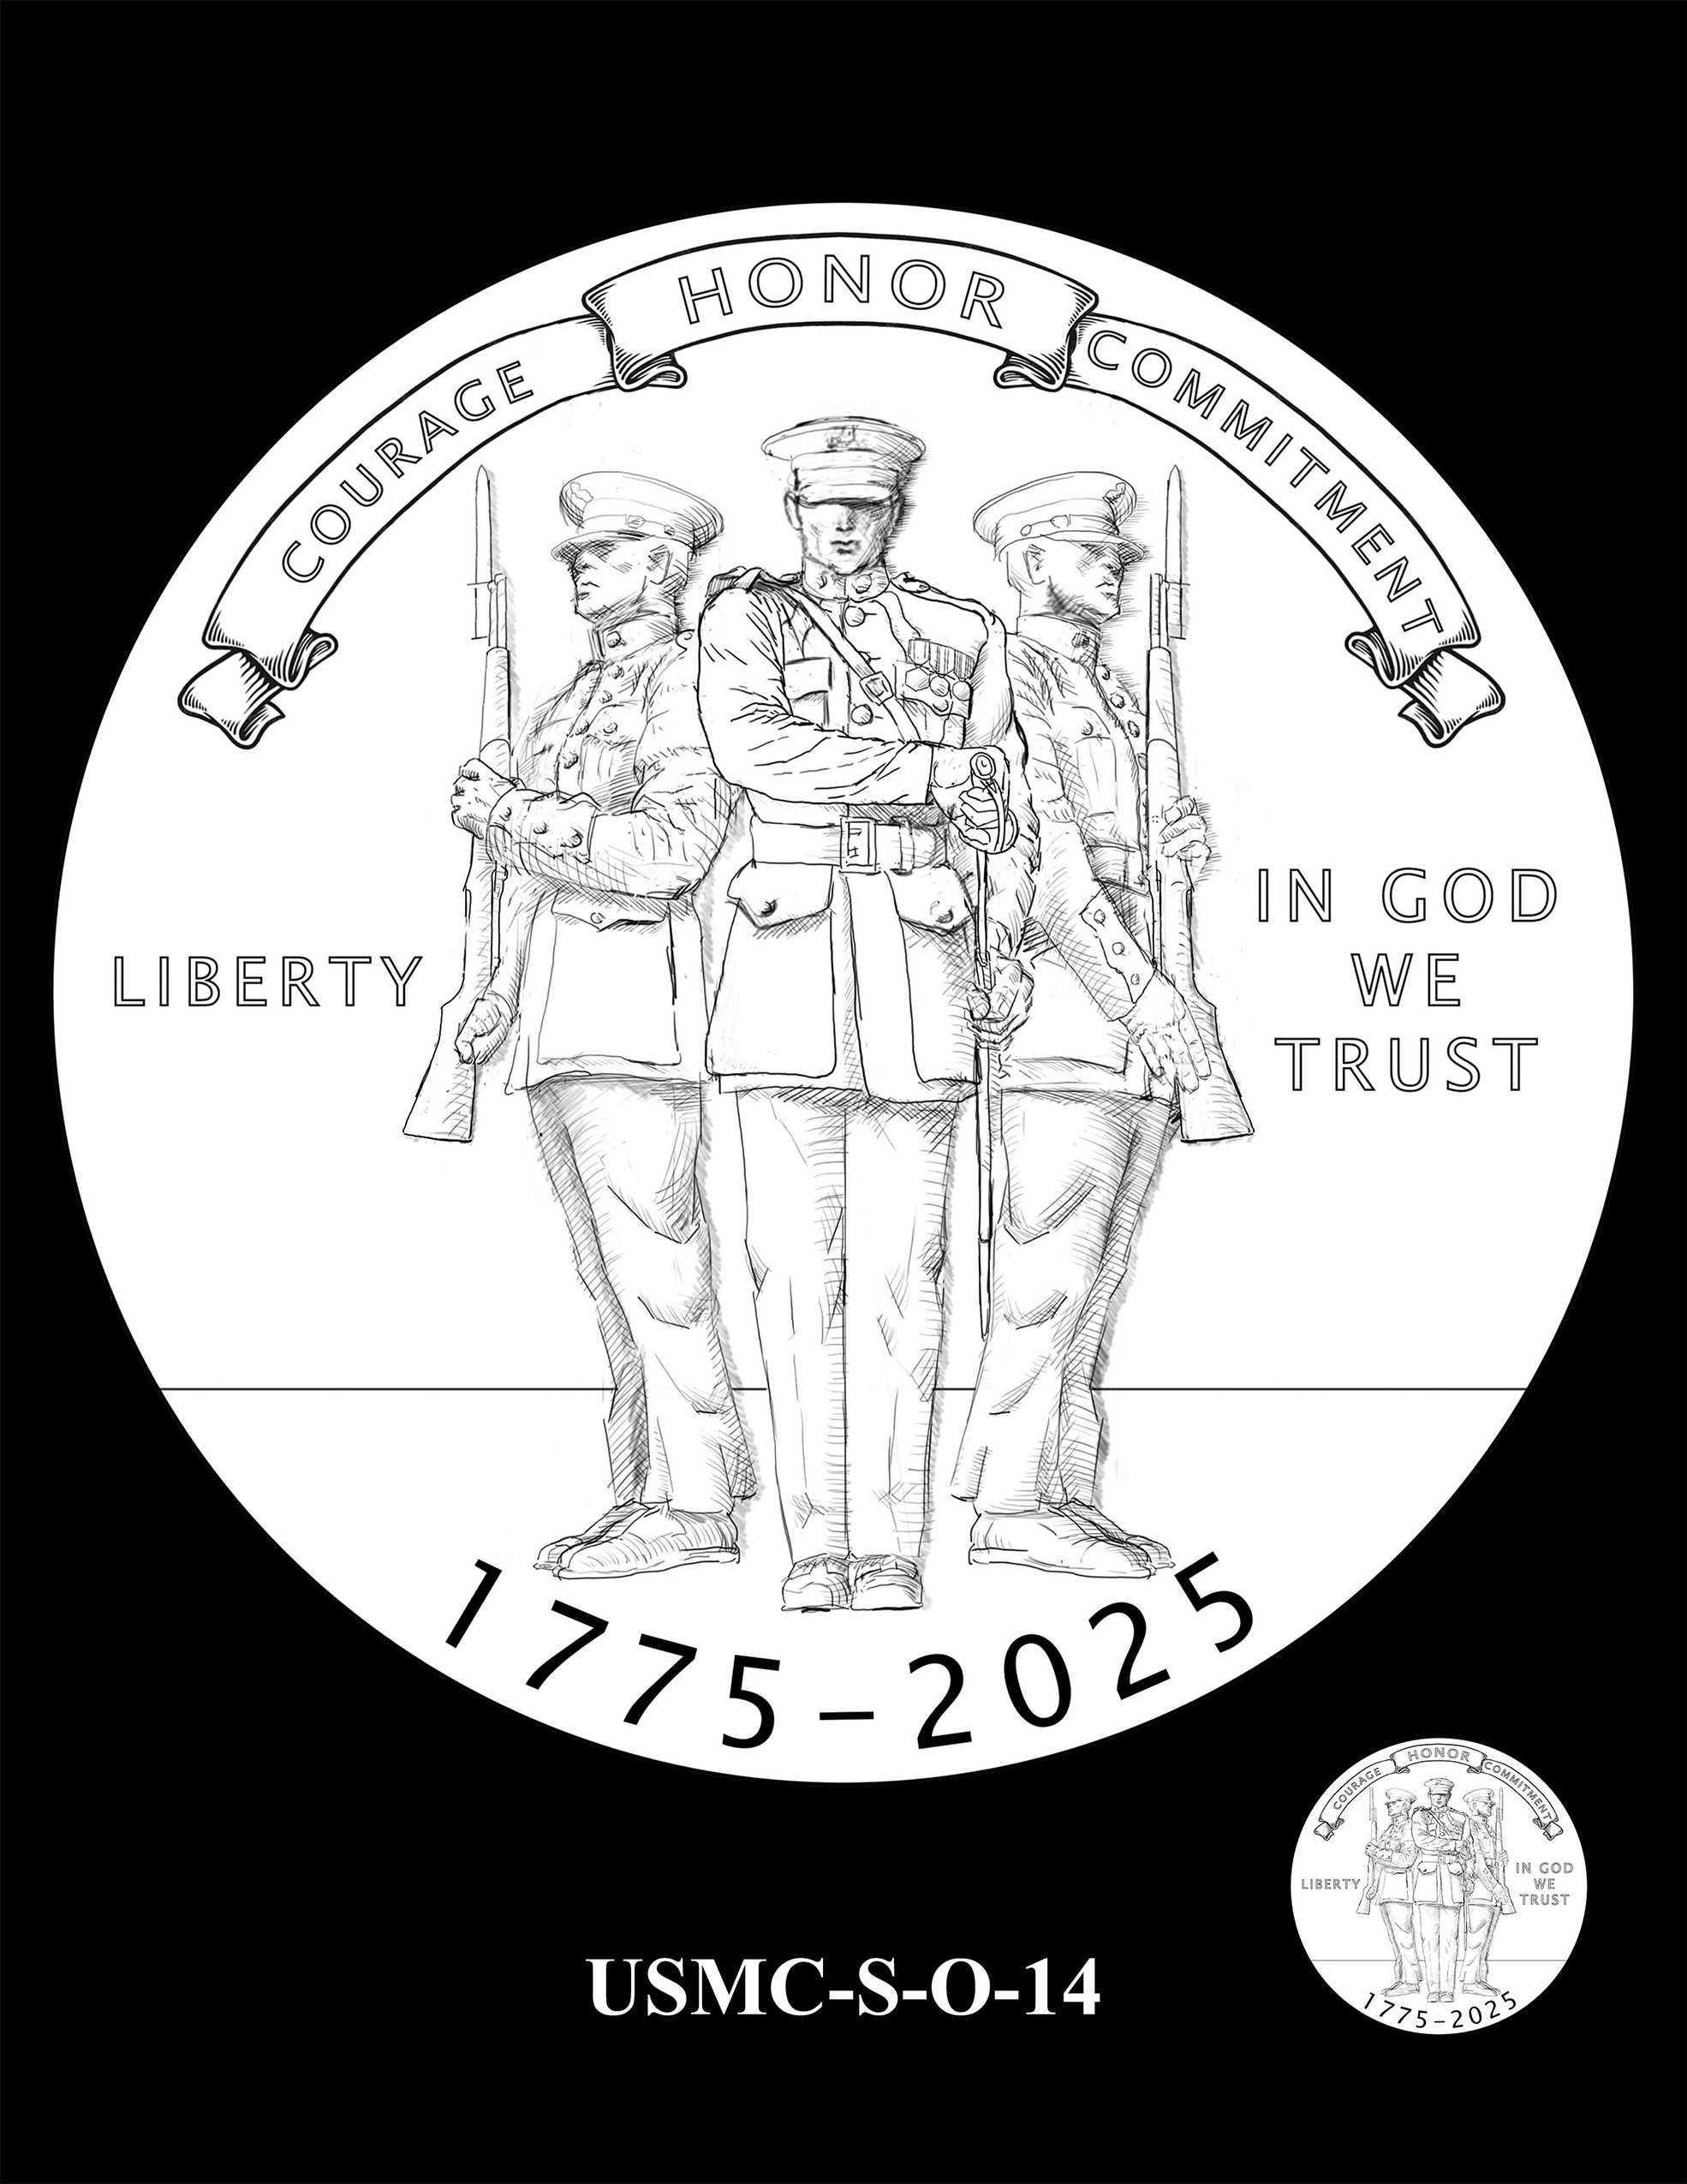 USMC-S-O-14 -- 250th Anniversary of the United States Marine Corps - Silver